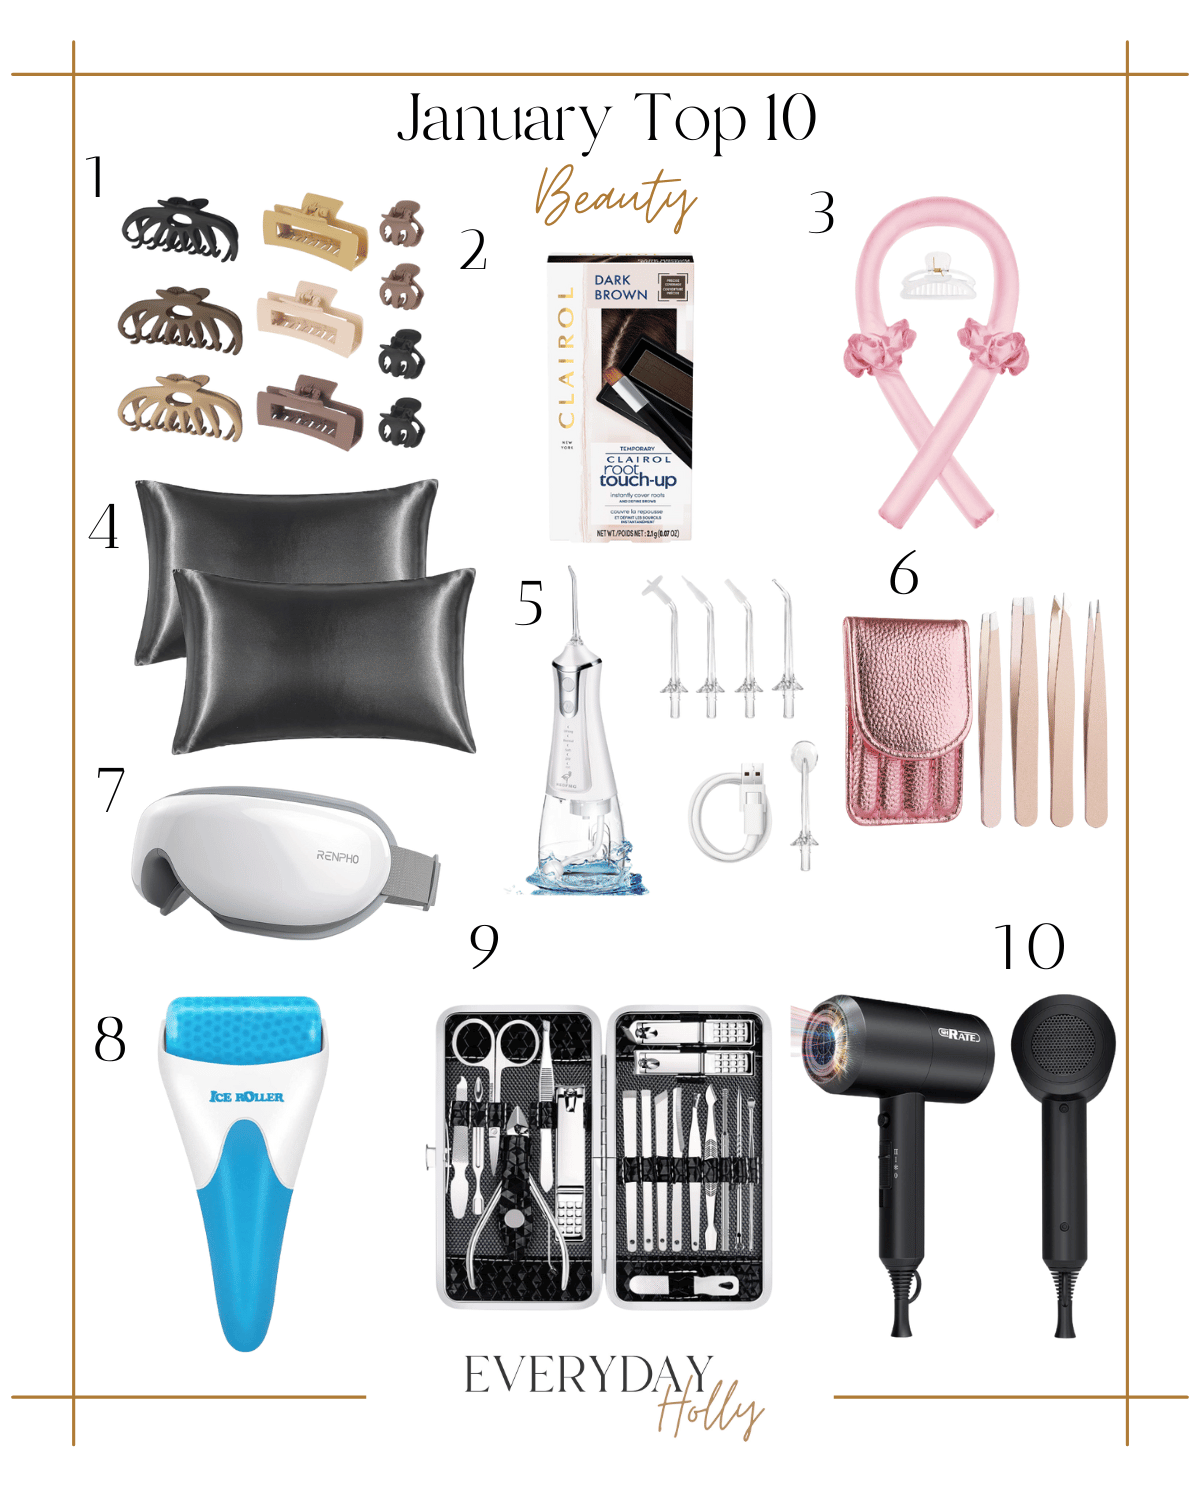 top 10 beauty, january top selling beauty, claw clips, root touch up, heatless hair curler, silk pillow cases, water flosser, tweezer kit, eye massager, ice roller, nail kit, ionic blow dryer, beauty essentials 